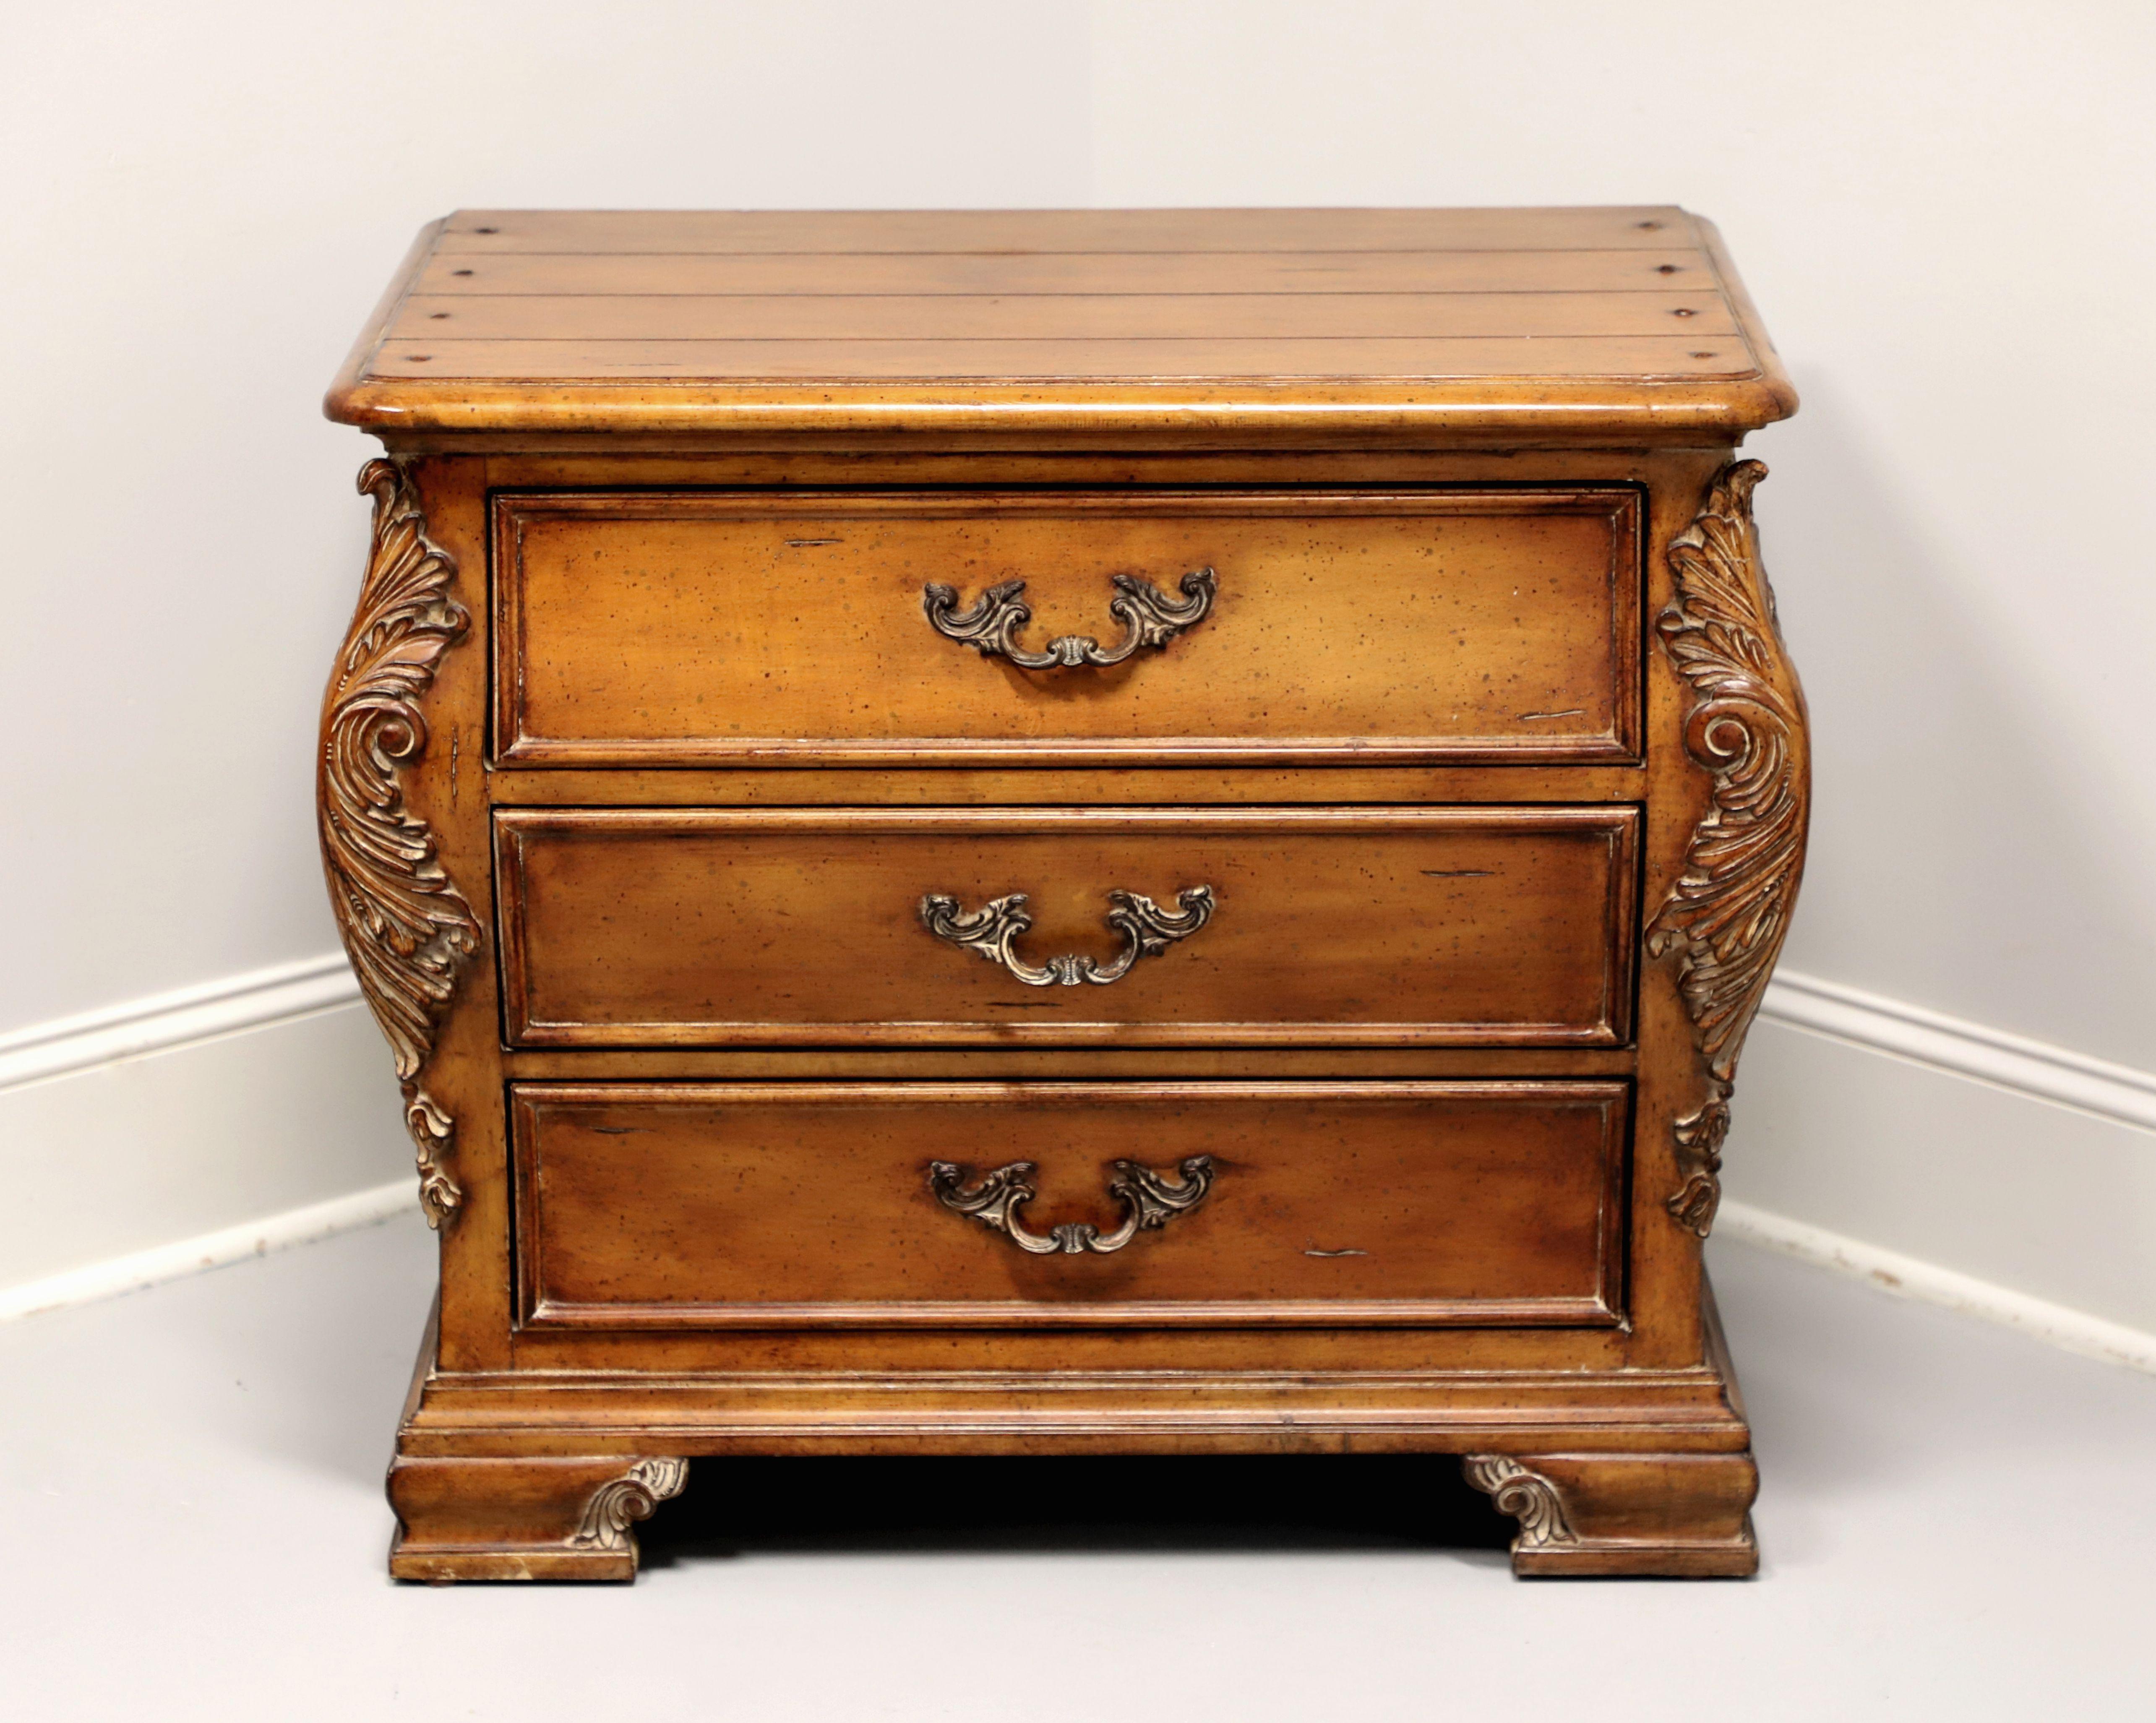 A bedside chest in the French Country style by Thomasville, from their Chateau Provence Collection. Walnut with brass hardware, a slightly distressed finish, plank style top with bullnose edge, decoratively carved contoured sides with acanthus